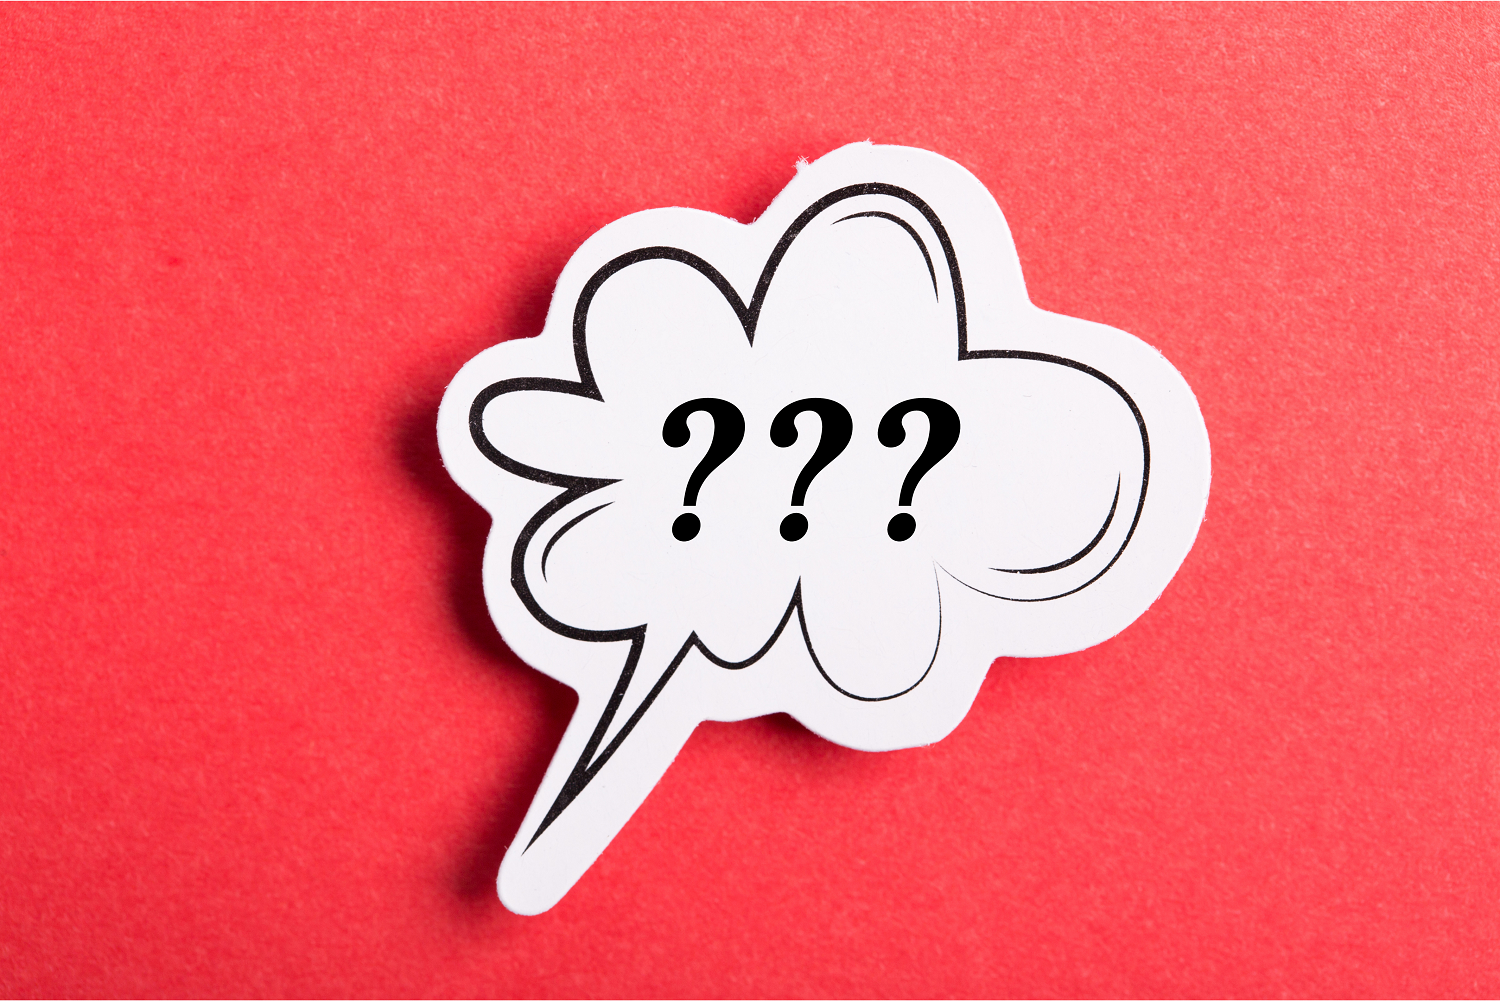 A thought bubble with three question marks inside on a red background, representing questions to ask a charity lottery provider